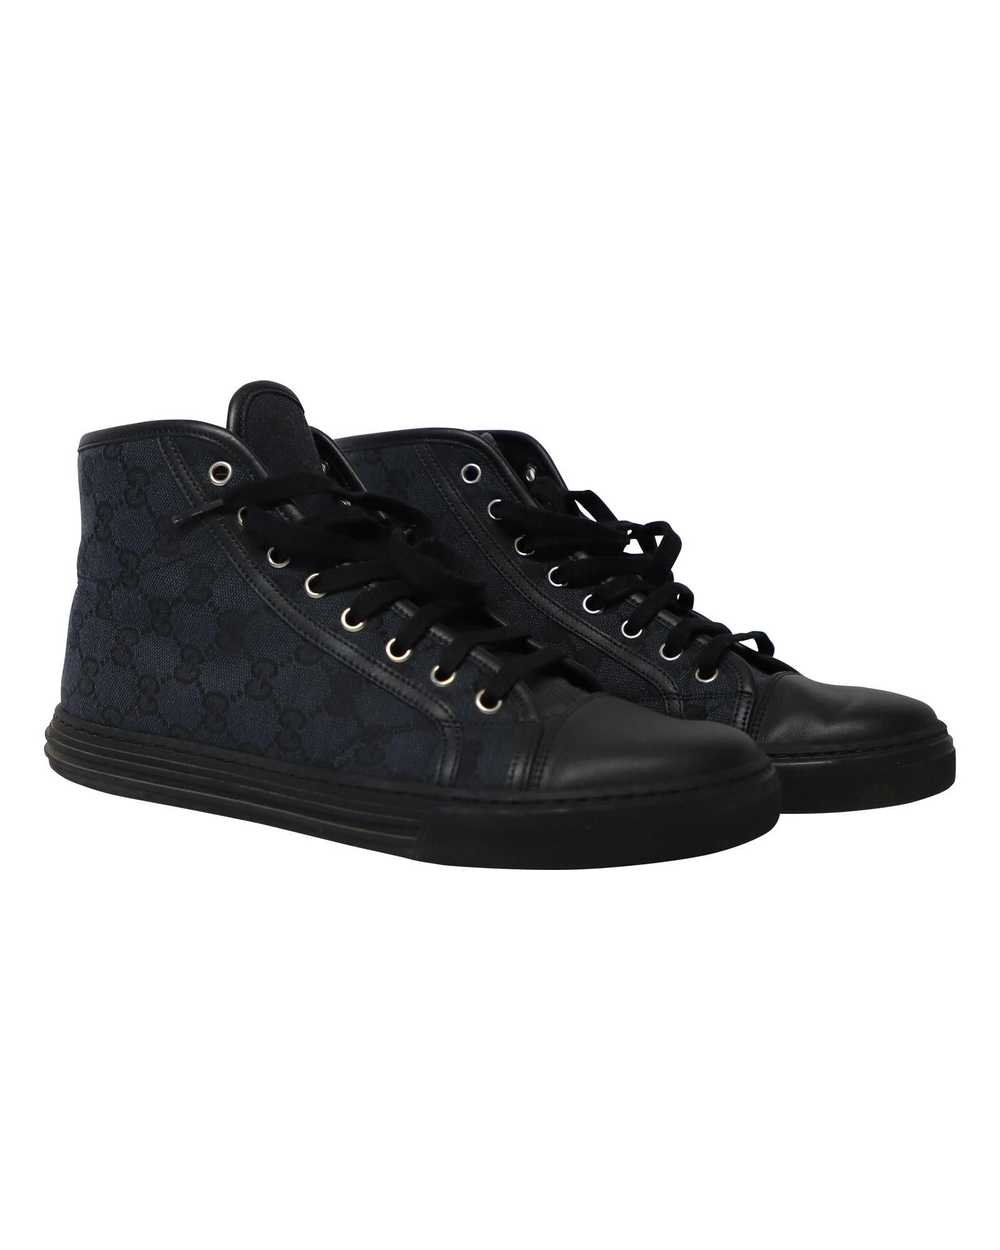 Gucci GG High Cut Sneakers in Navy Blue Canvas - image 3